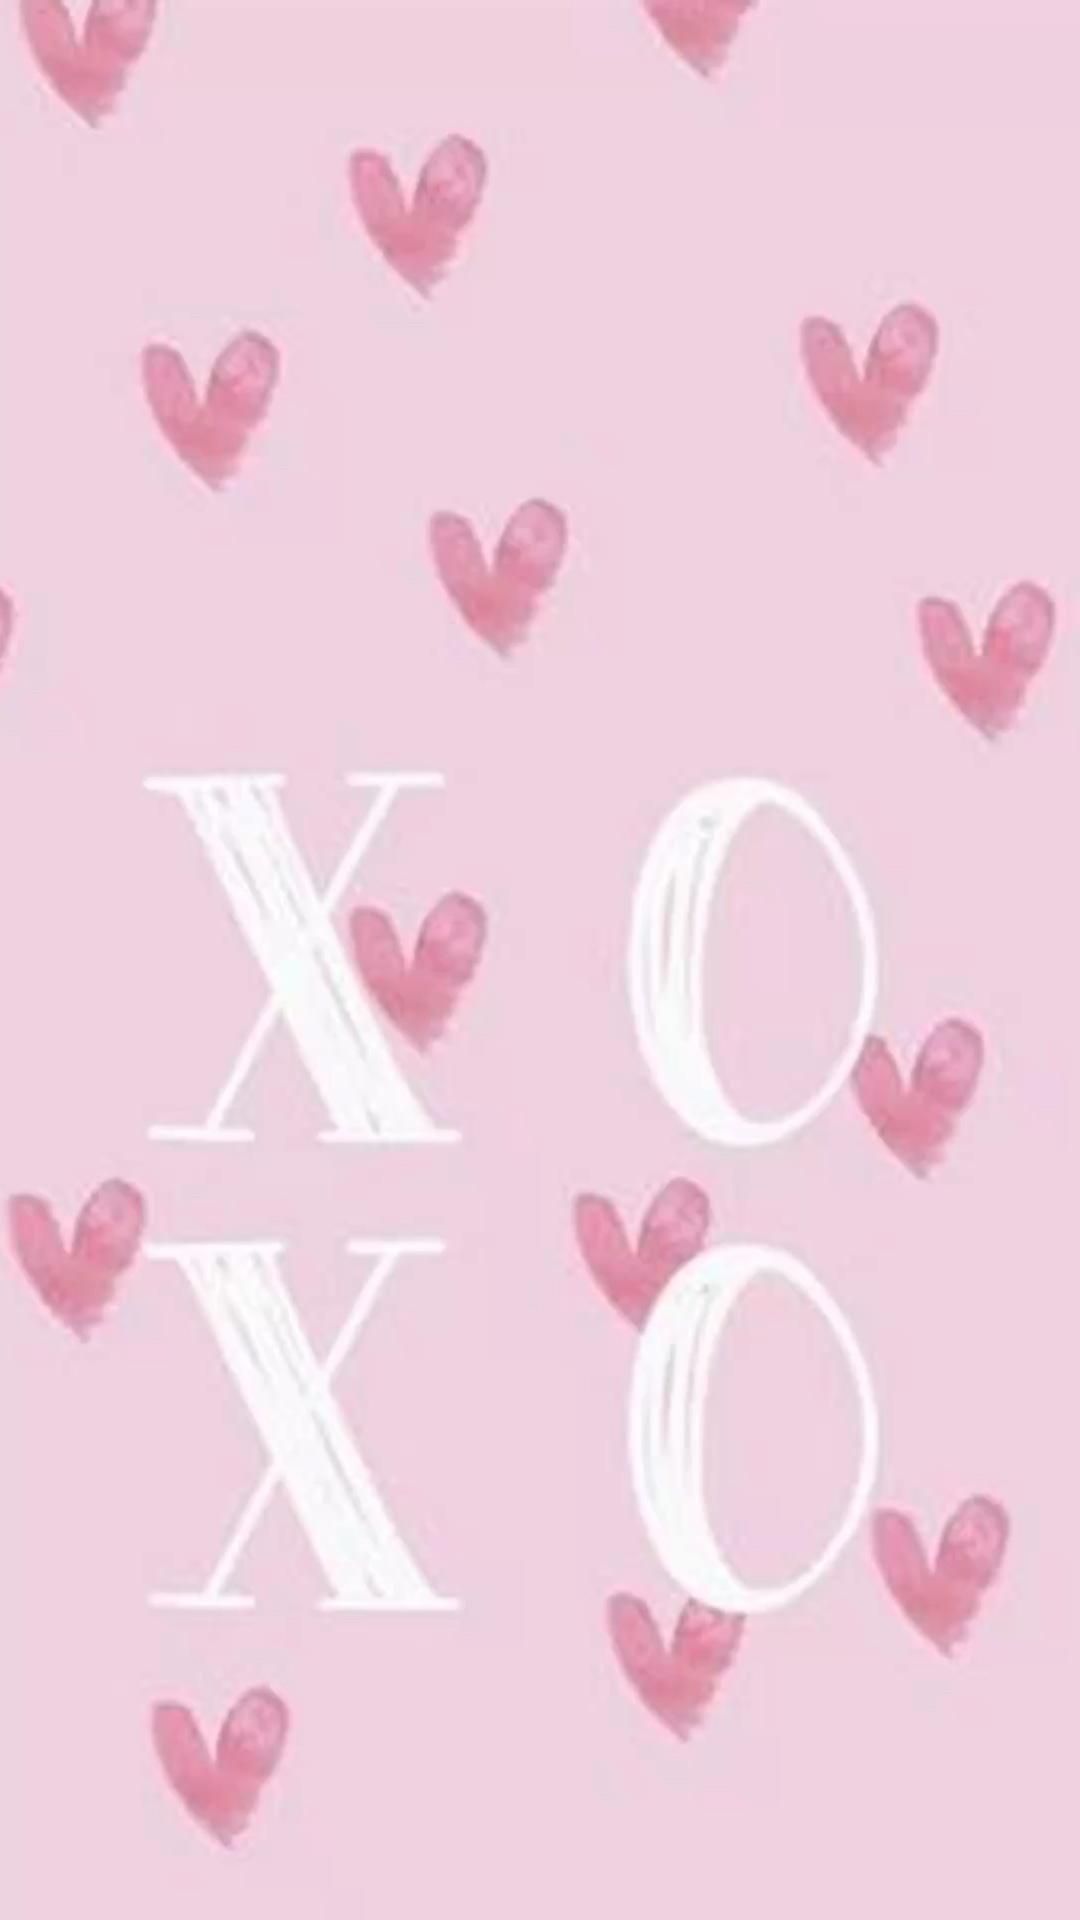 A phone wallpaper with hearts and the letters XOXO on a pink background. - Valentine's Day